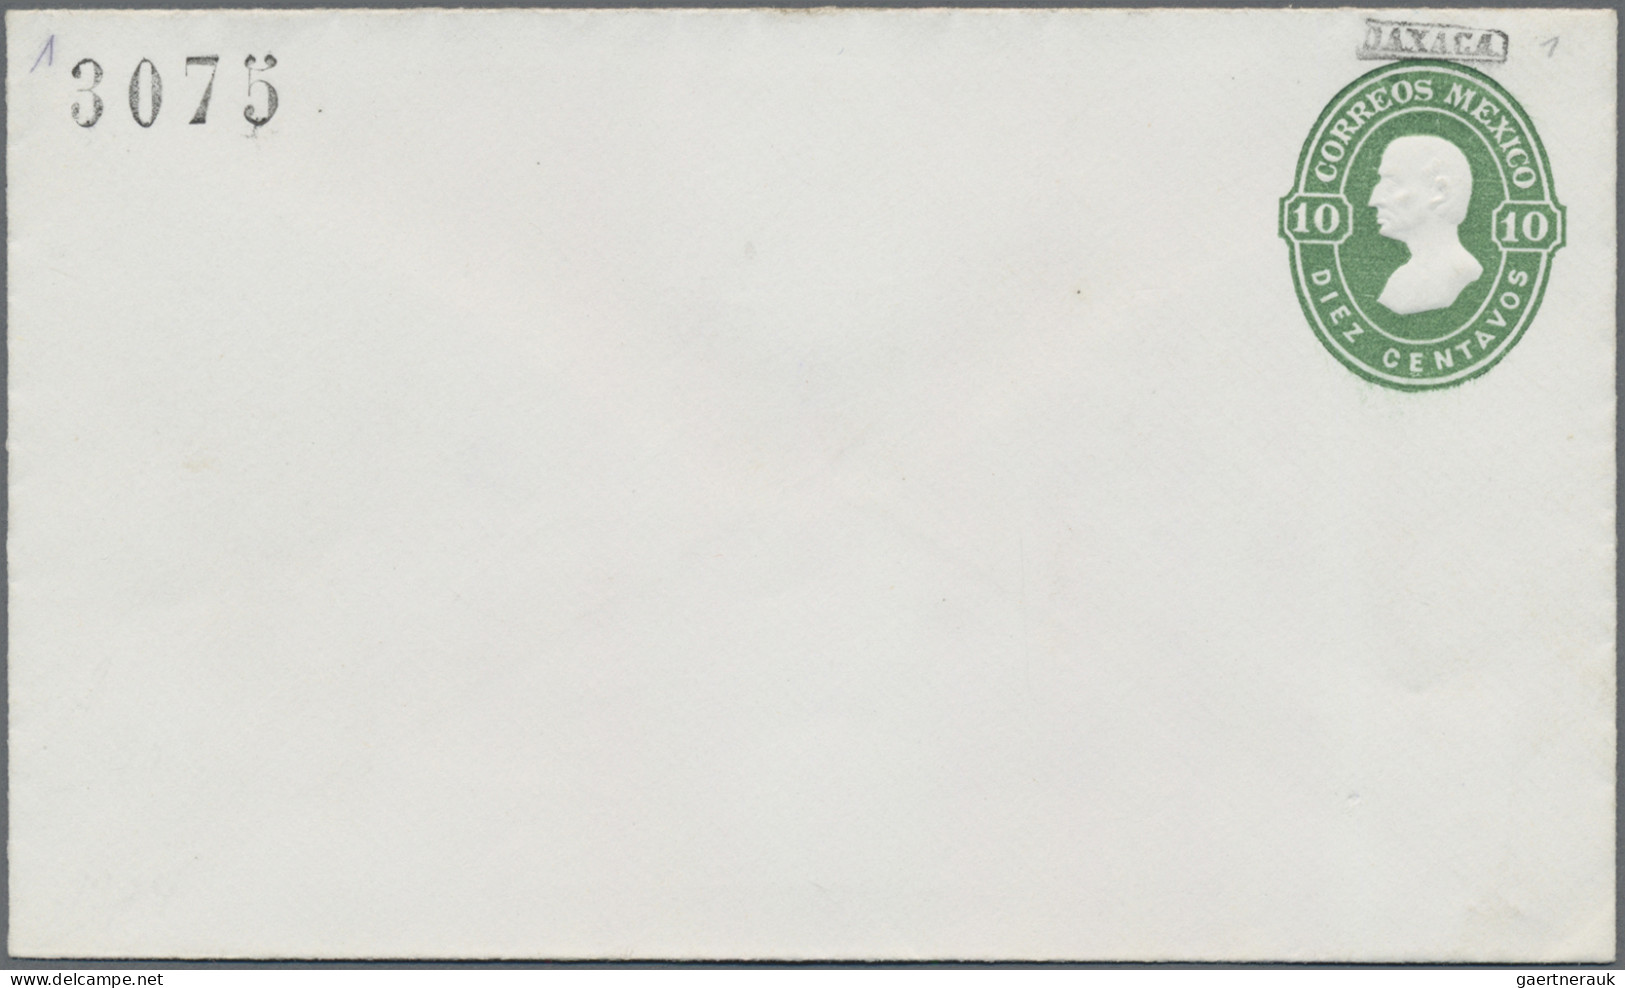 Mexico - Postal stationary: 1874, envelope 10 C. green (5) with district ovpt. 3